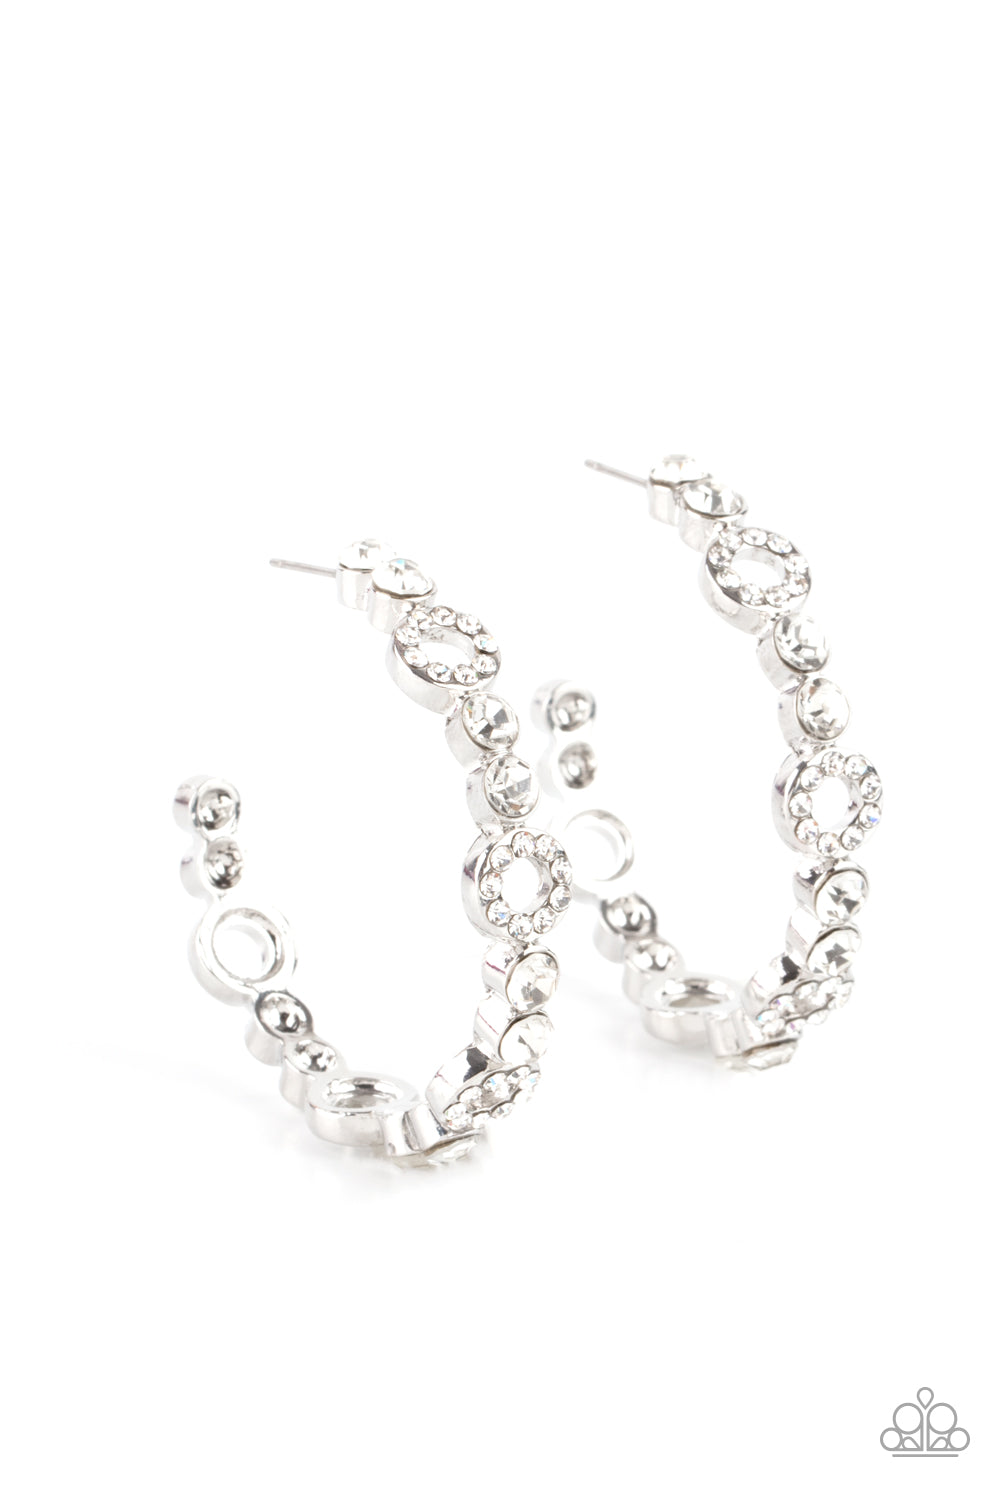 Paparazzi Earrings - Swoon-Worthy Sparkle - White